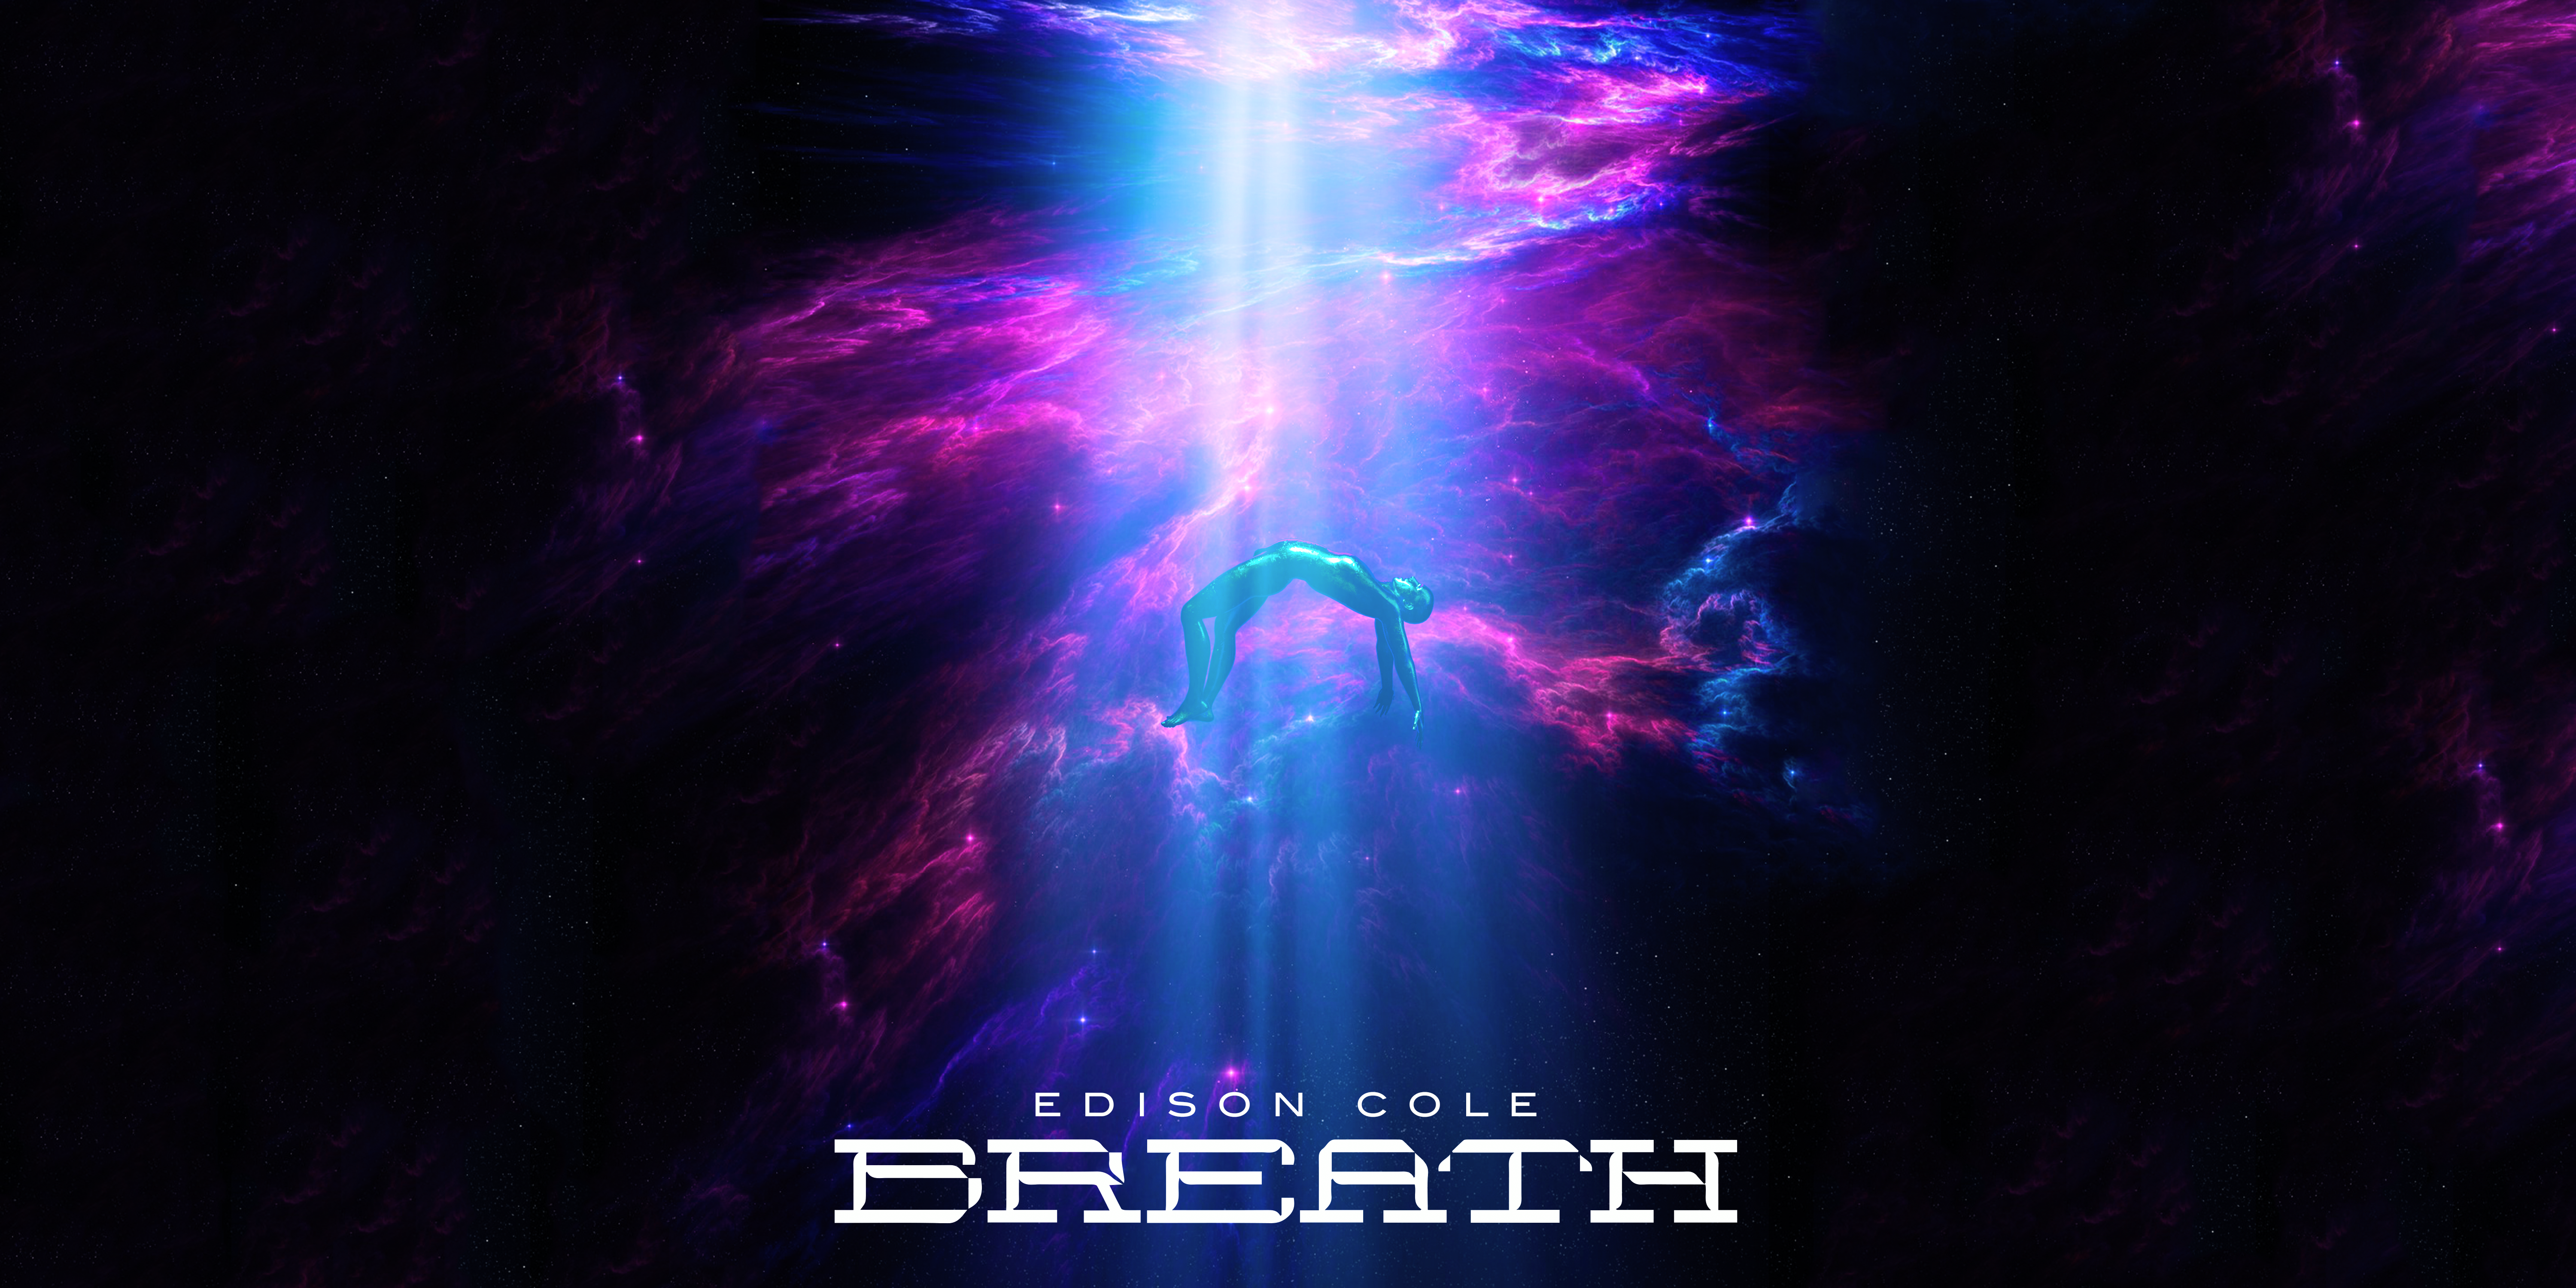 Forward-Thinking Artist Edison Cole Throws It Down With New Single ‘Breathe’